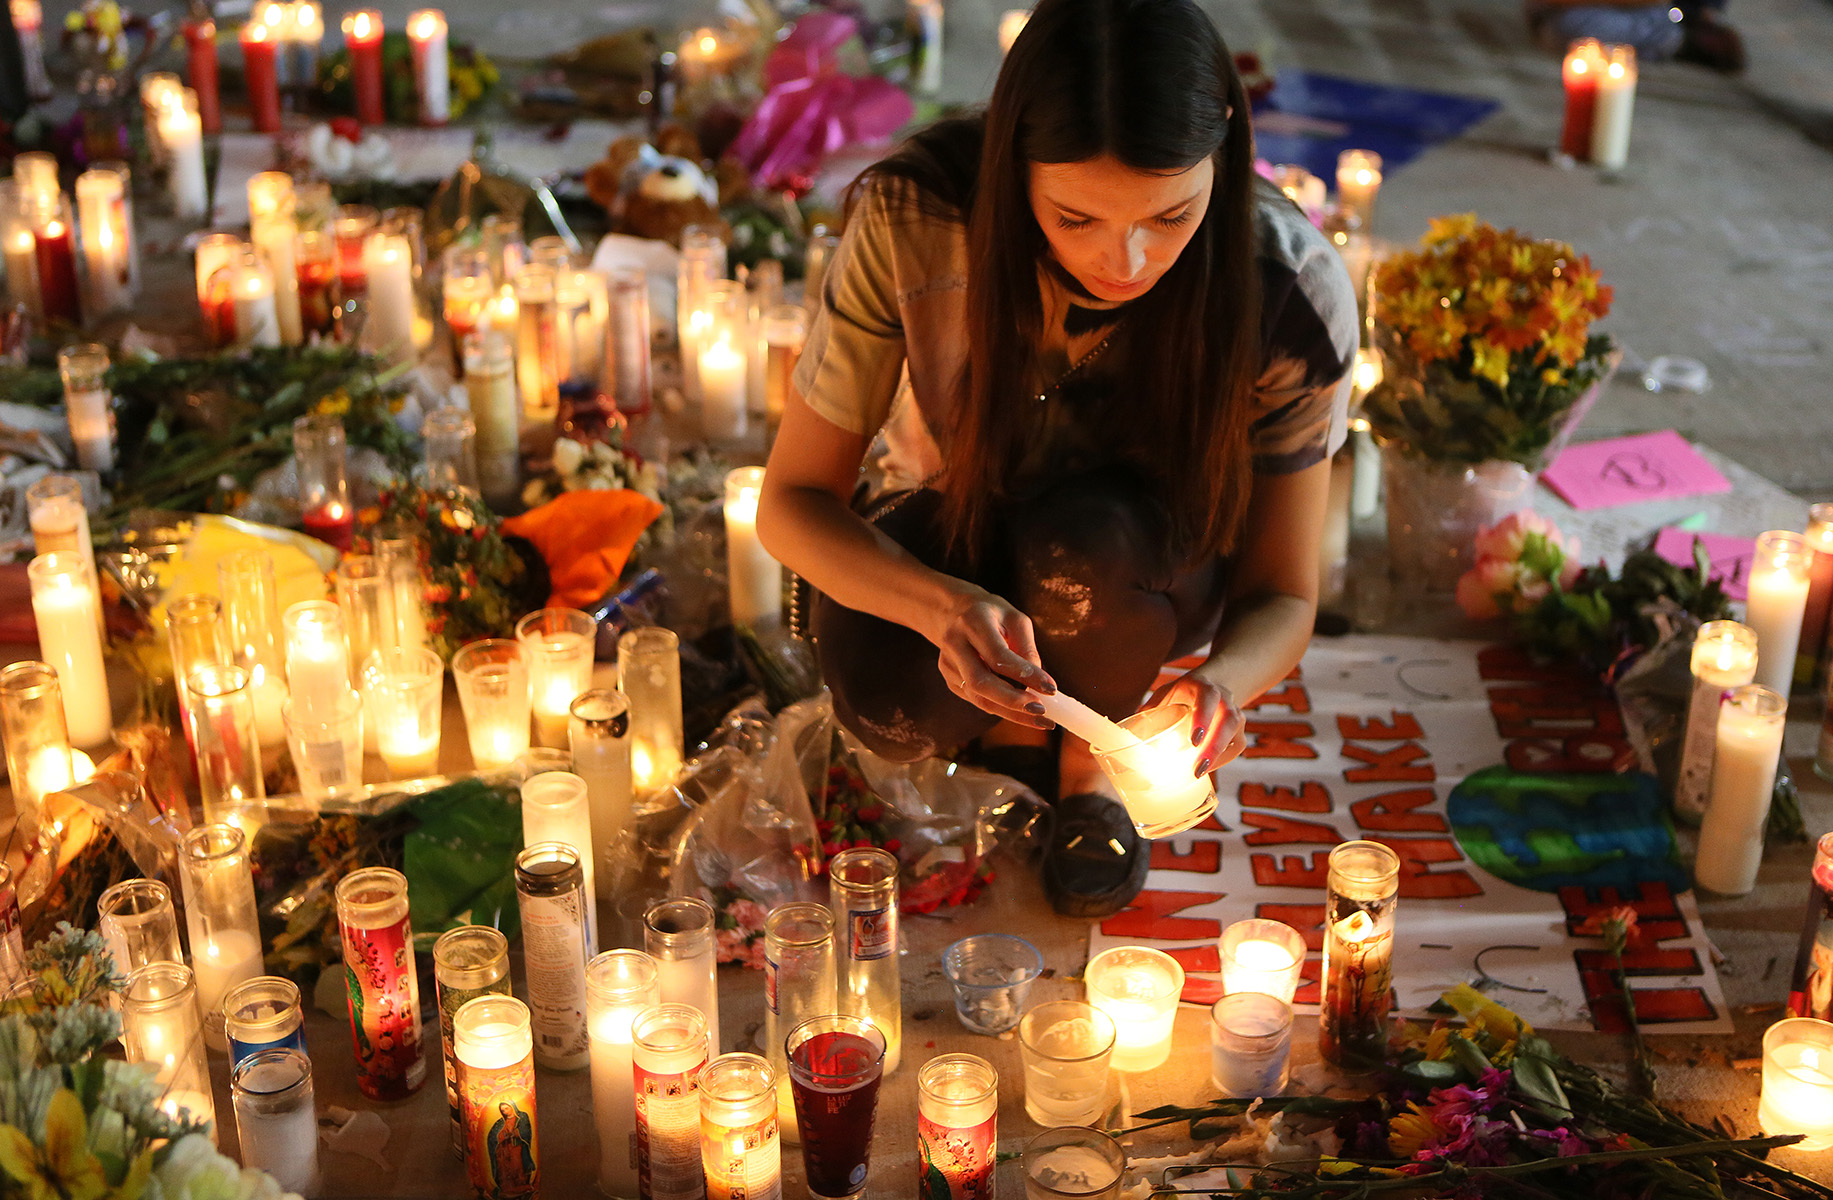 Dashenka, Giraldo, lights candles for the victims of Sunday night's Route 91 Harvest mass shooting at a makeshift memorial on the corner of Las Vegas Boulevard and Sahara Avenue Wednesday, Oct. 4, 2017.